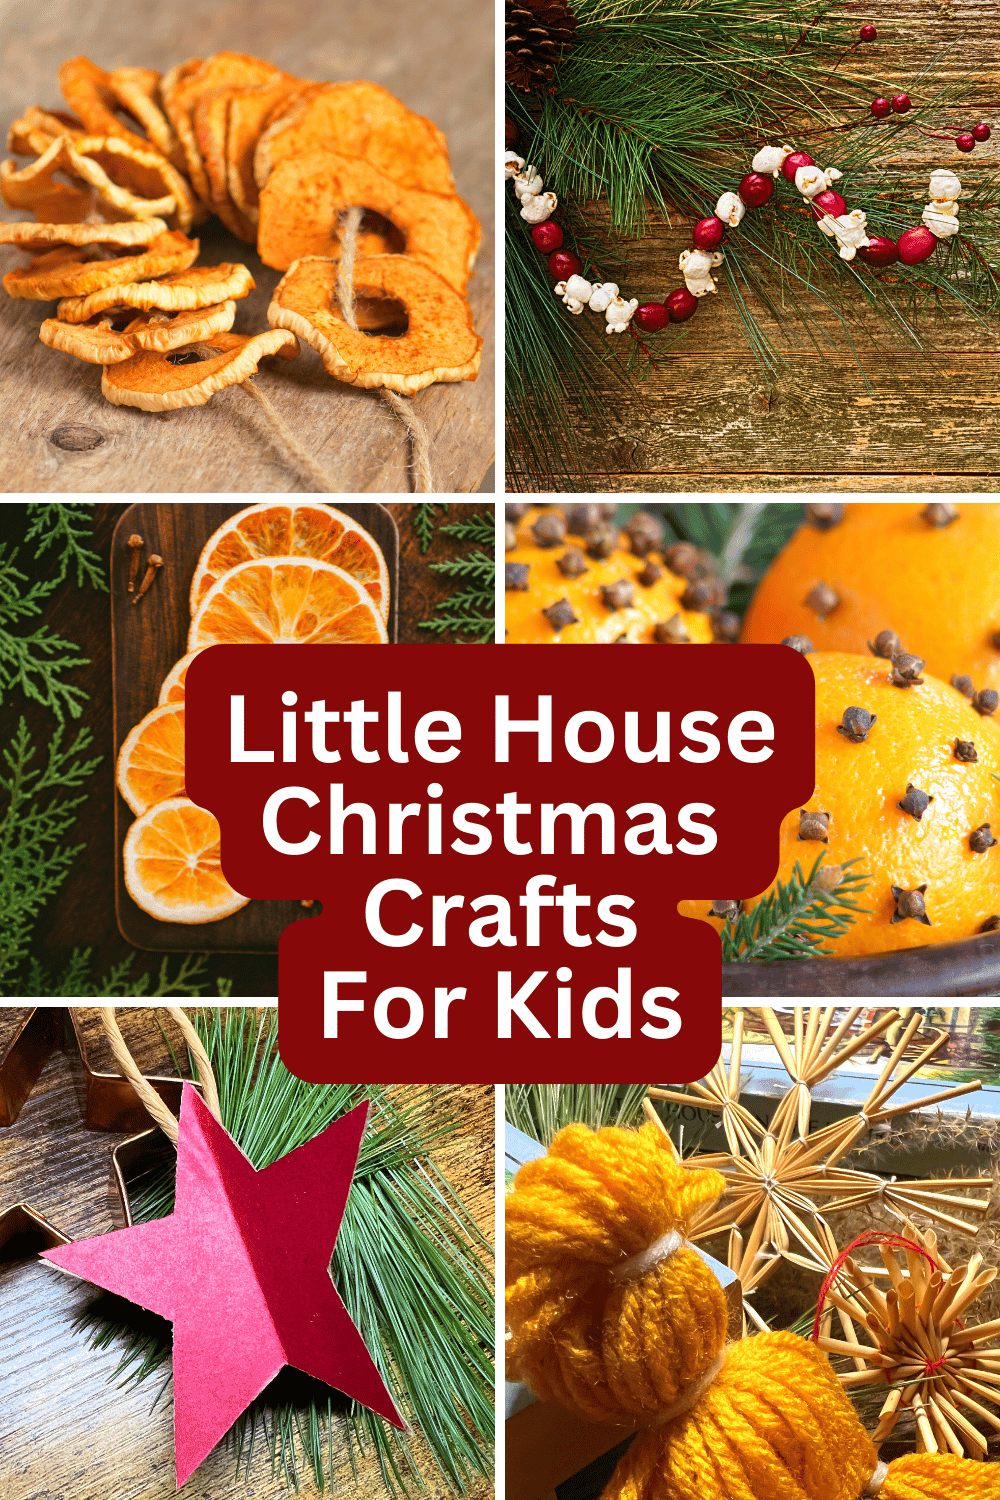 Little House On The Prairie Christmas Crafts different images of old fashioned pioneer crafts